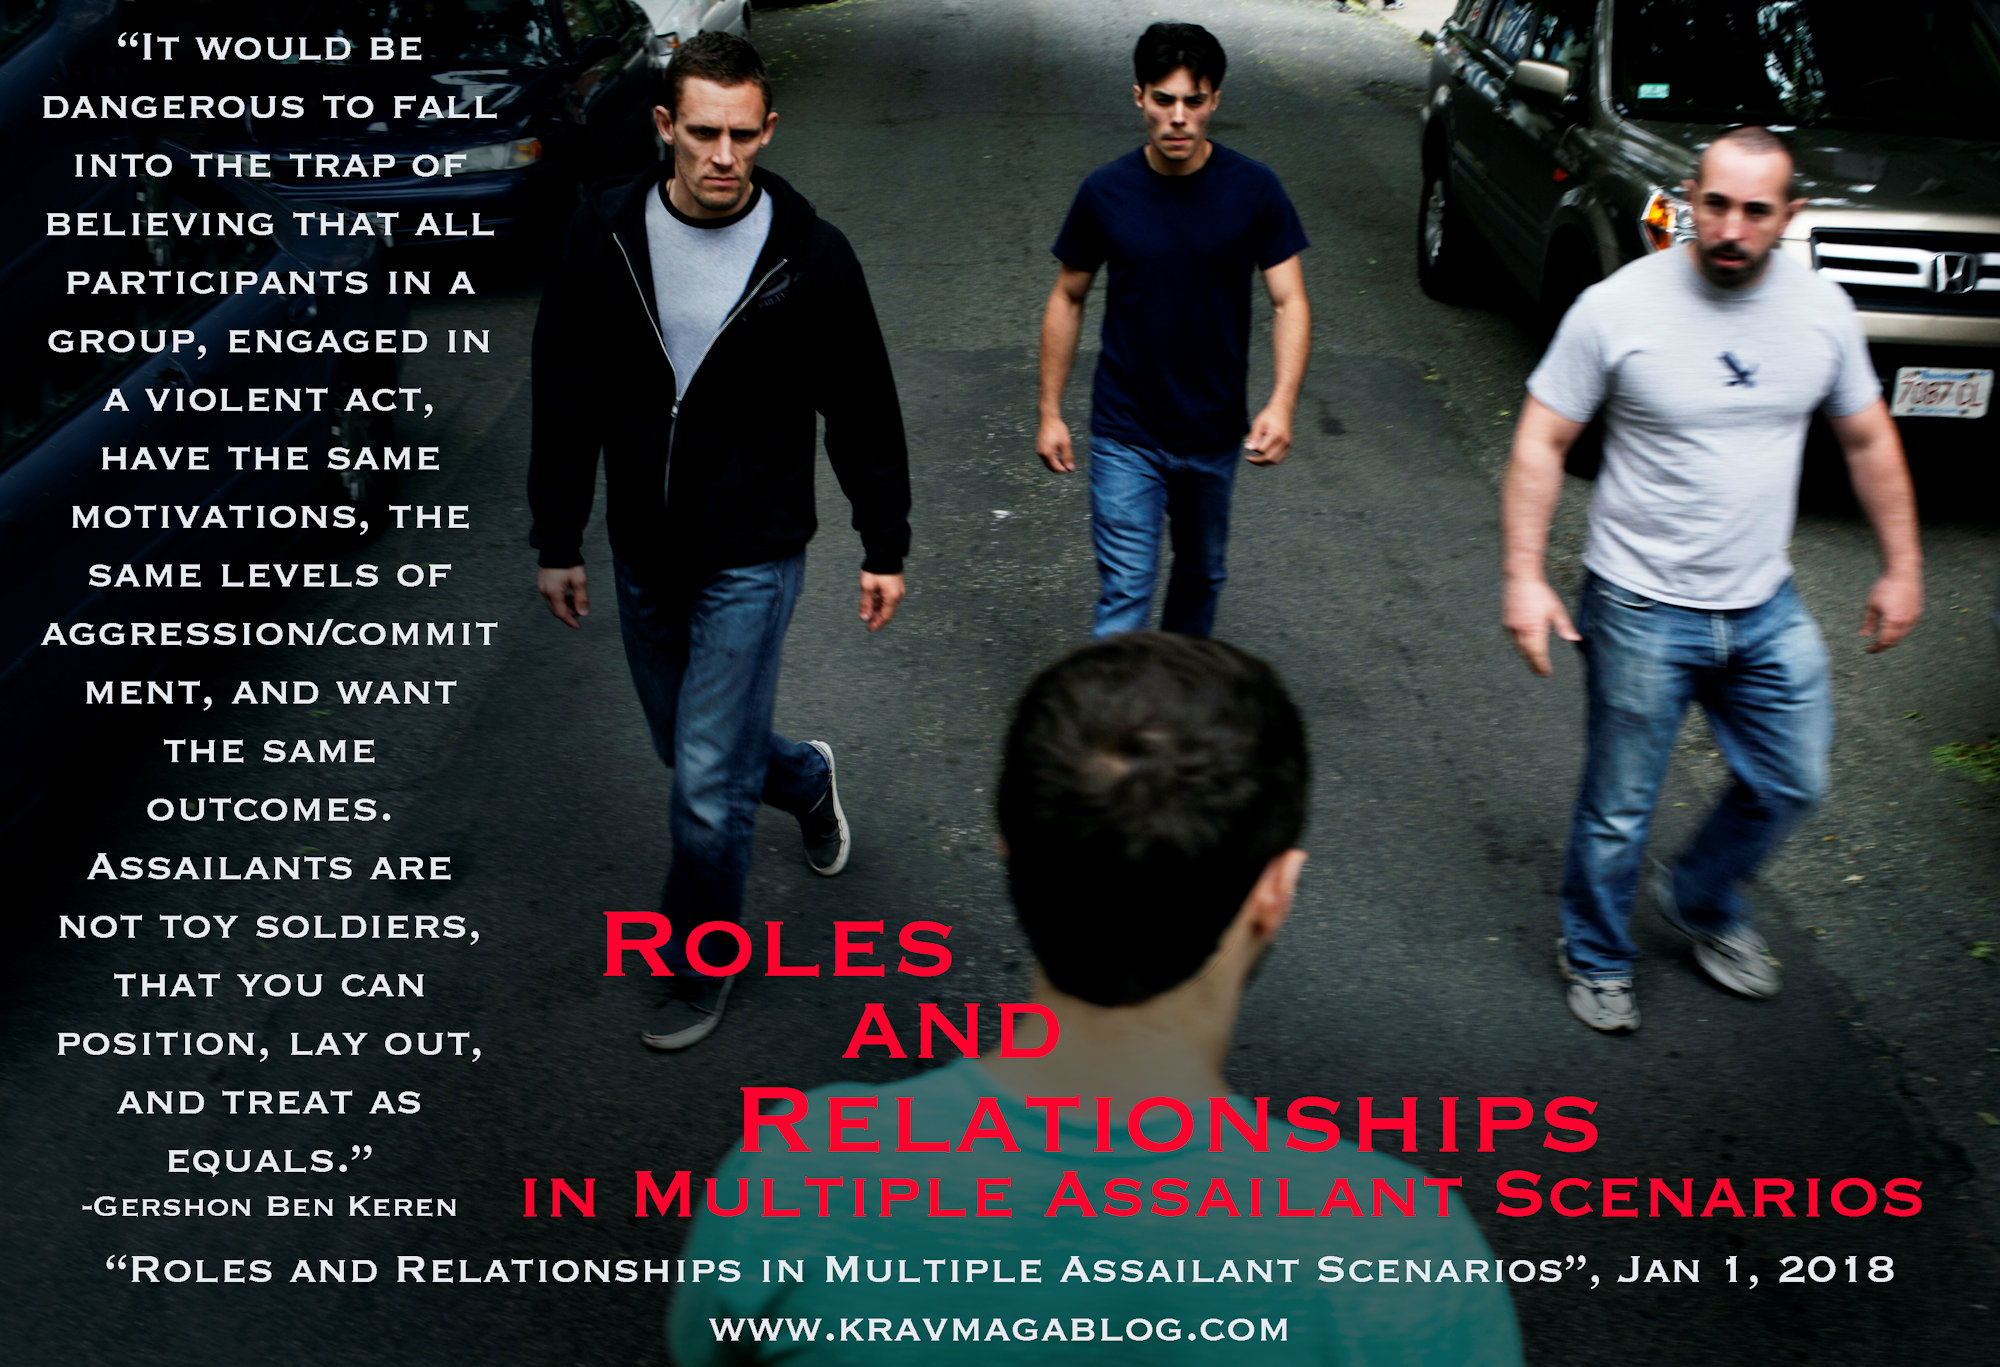 Roles and Relationships in Multiple Assailant Scenarios